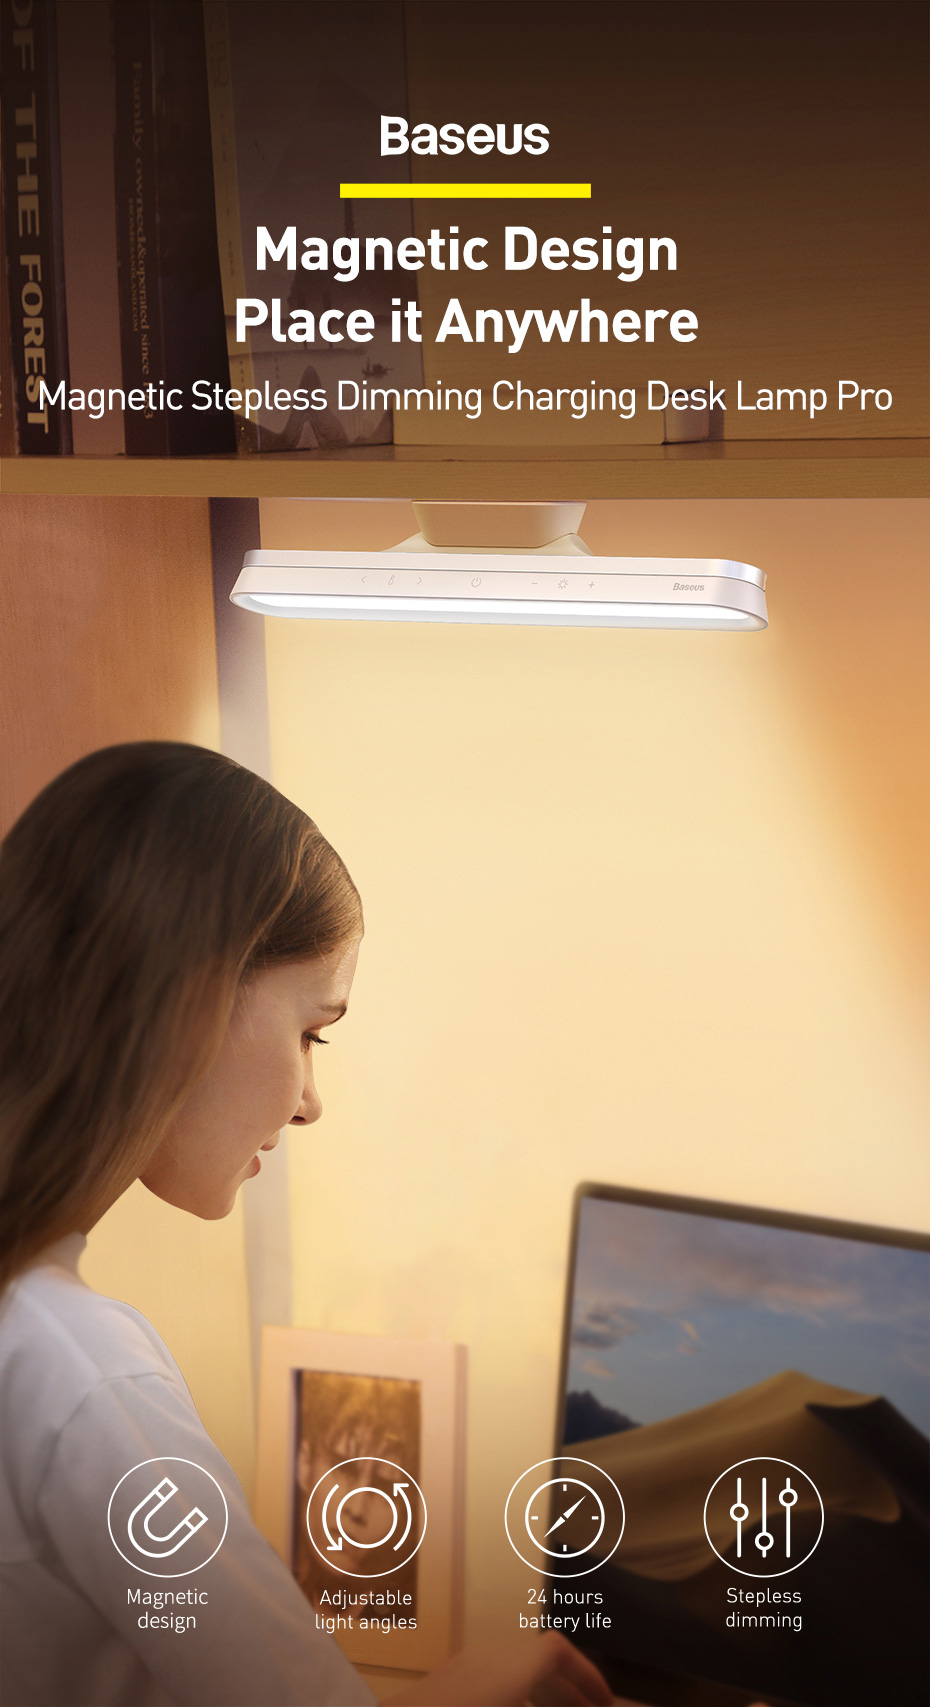 Baseus-Desk-Lamp-Hanging-Magnetic-LED-Table-Lamp-Chargeable-Stepless-Dimming-Cabinet-Light-Night-Lig-1755382-1